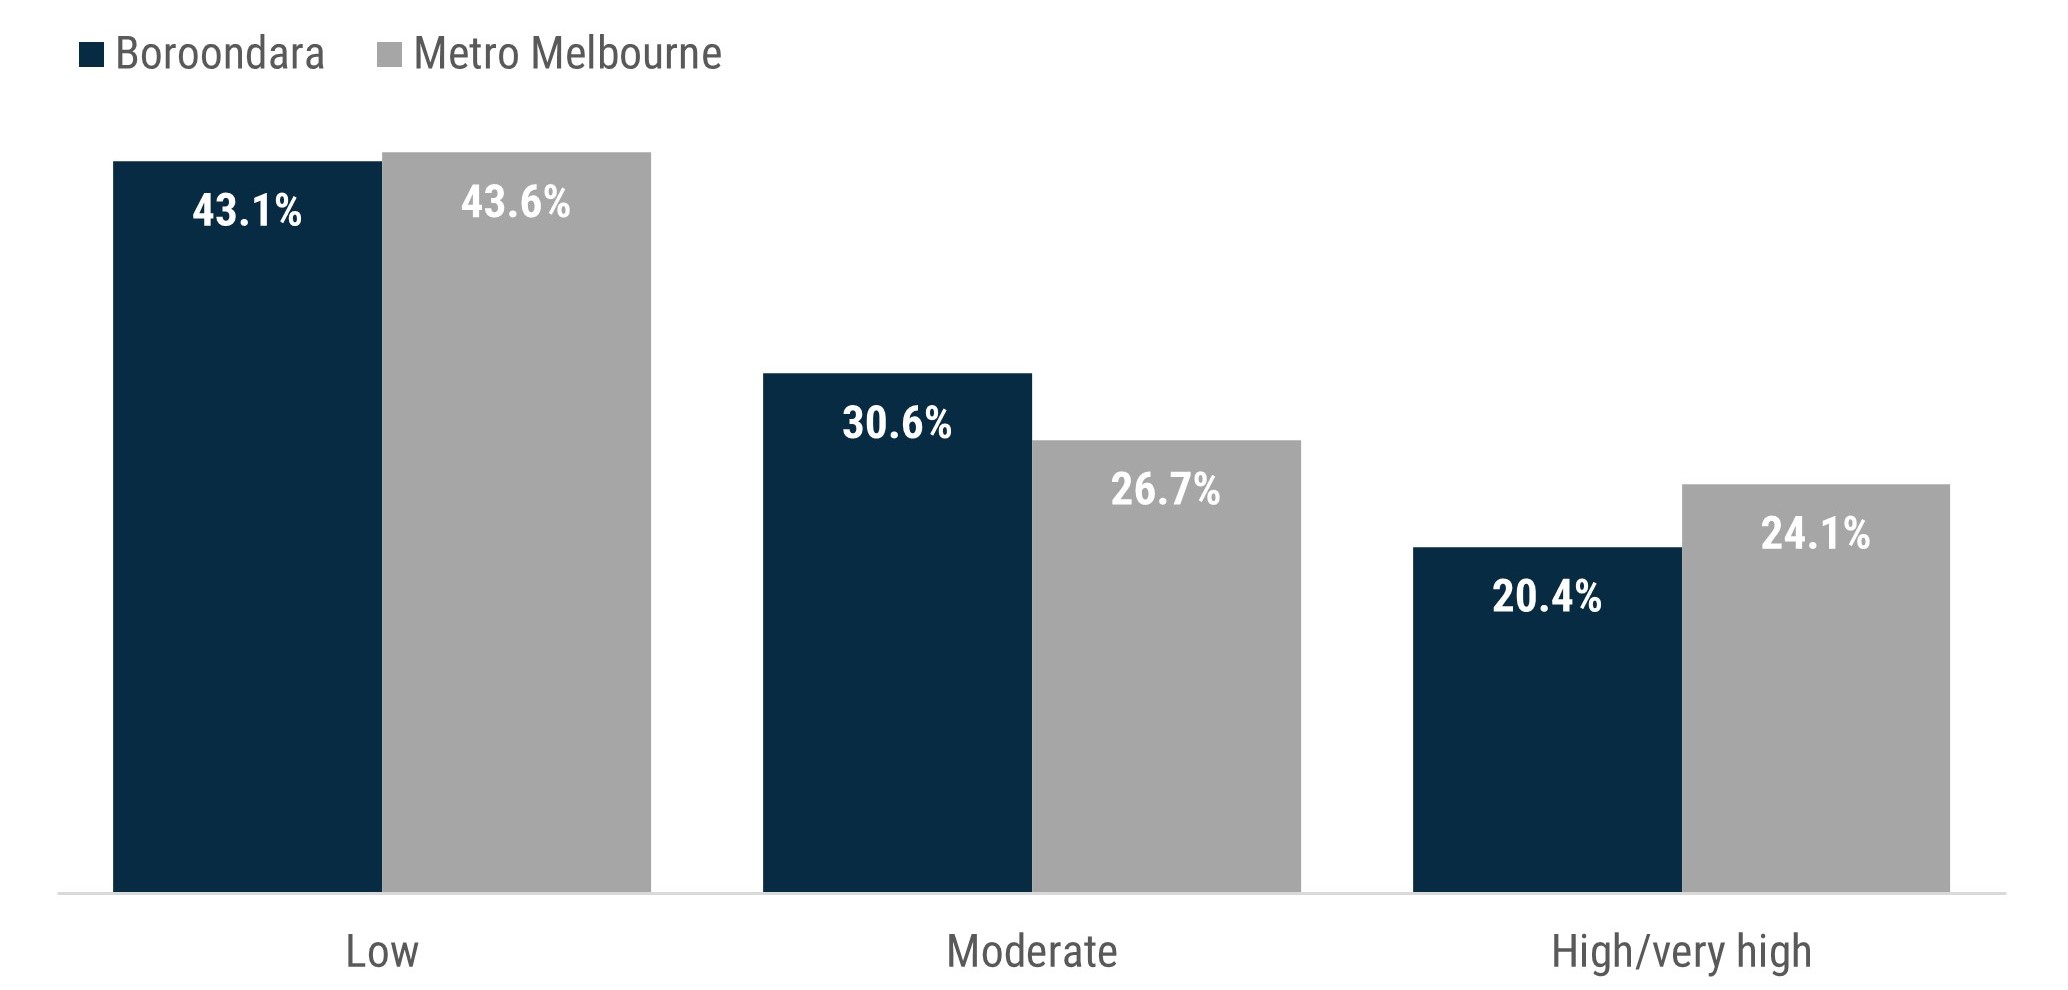 Bar chart which shows that 43% of Boroondara residents report low psychological distress, 31% report moderate psychological distress and 20% report high or very high psychological distress. Boroondara residents were more likely to report moderate psychological distress compared to the metropolitan Melbourne rate (27%) and less likely to report high or very high psychological distress compared to the metropolitan Melbourne rate of 24%.